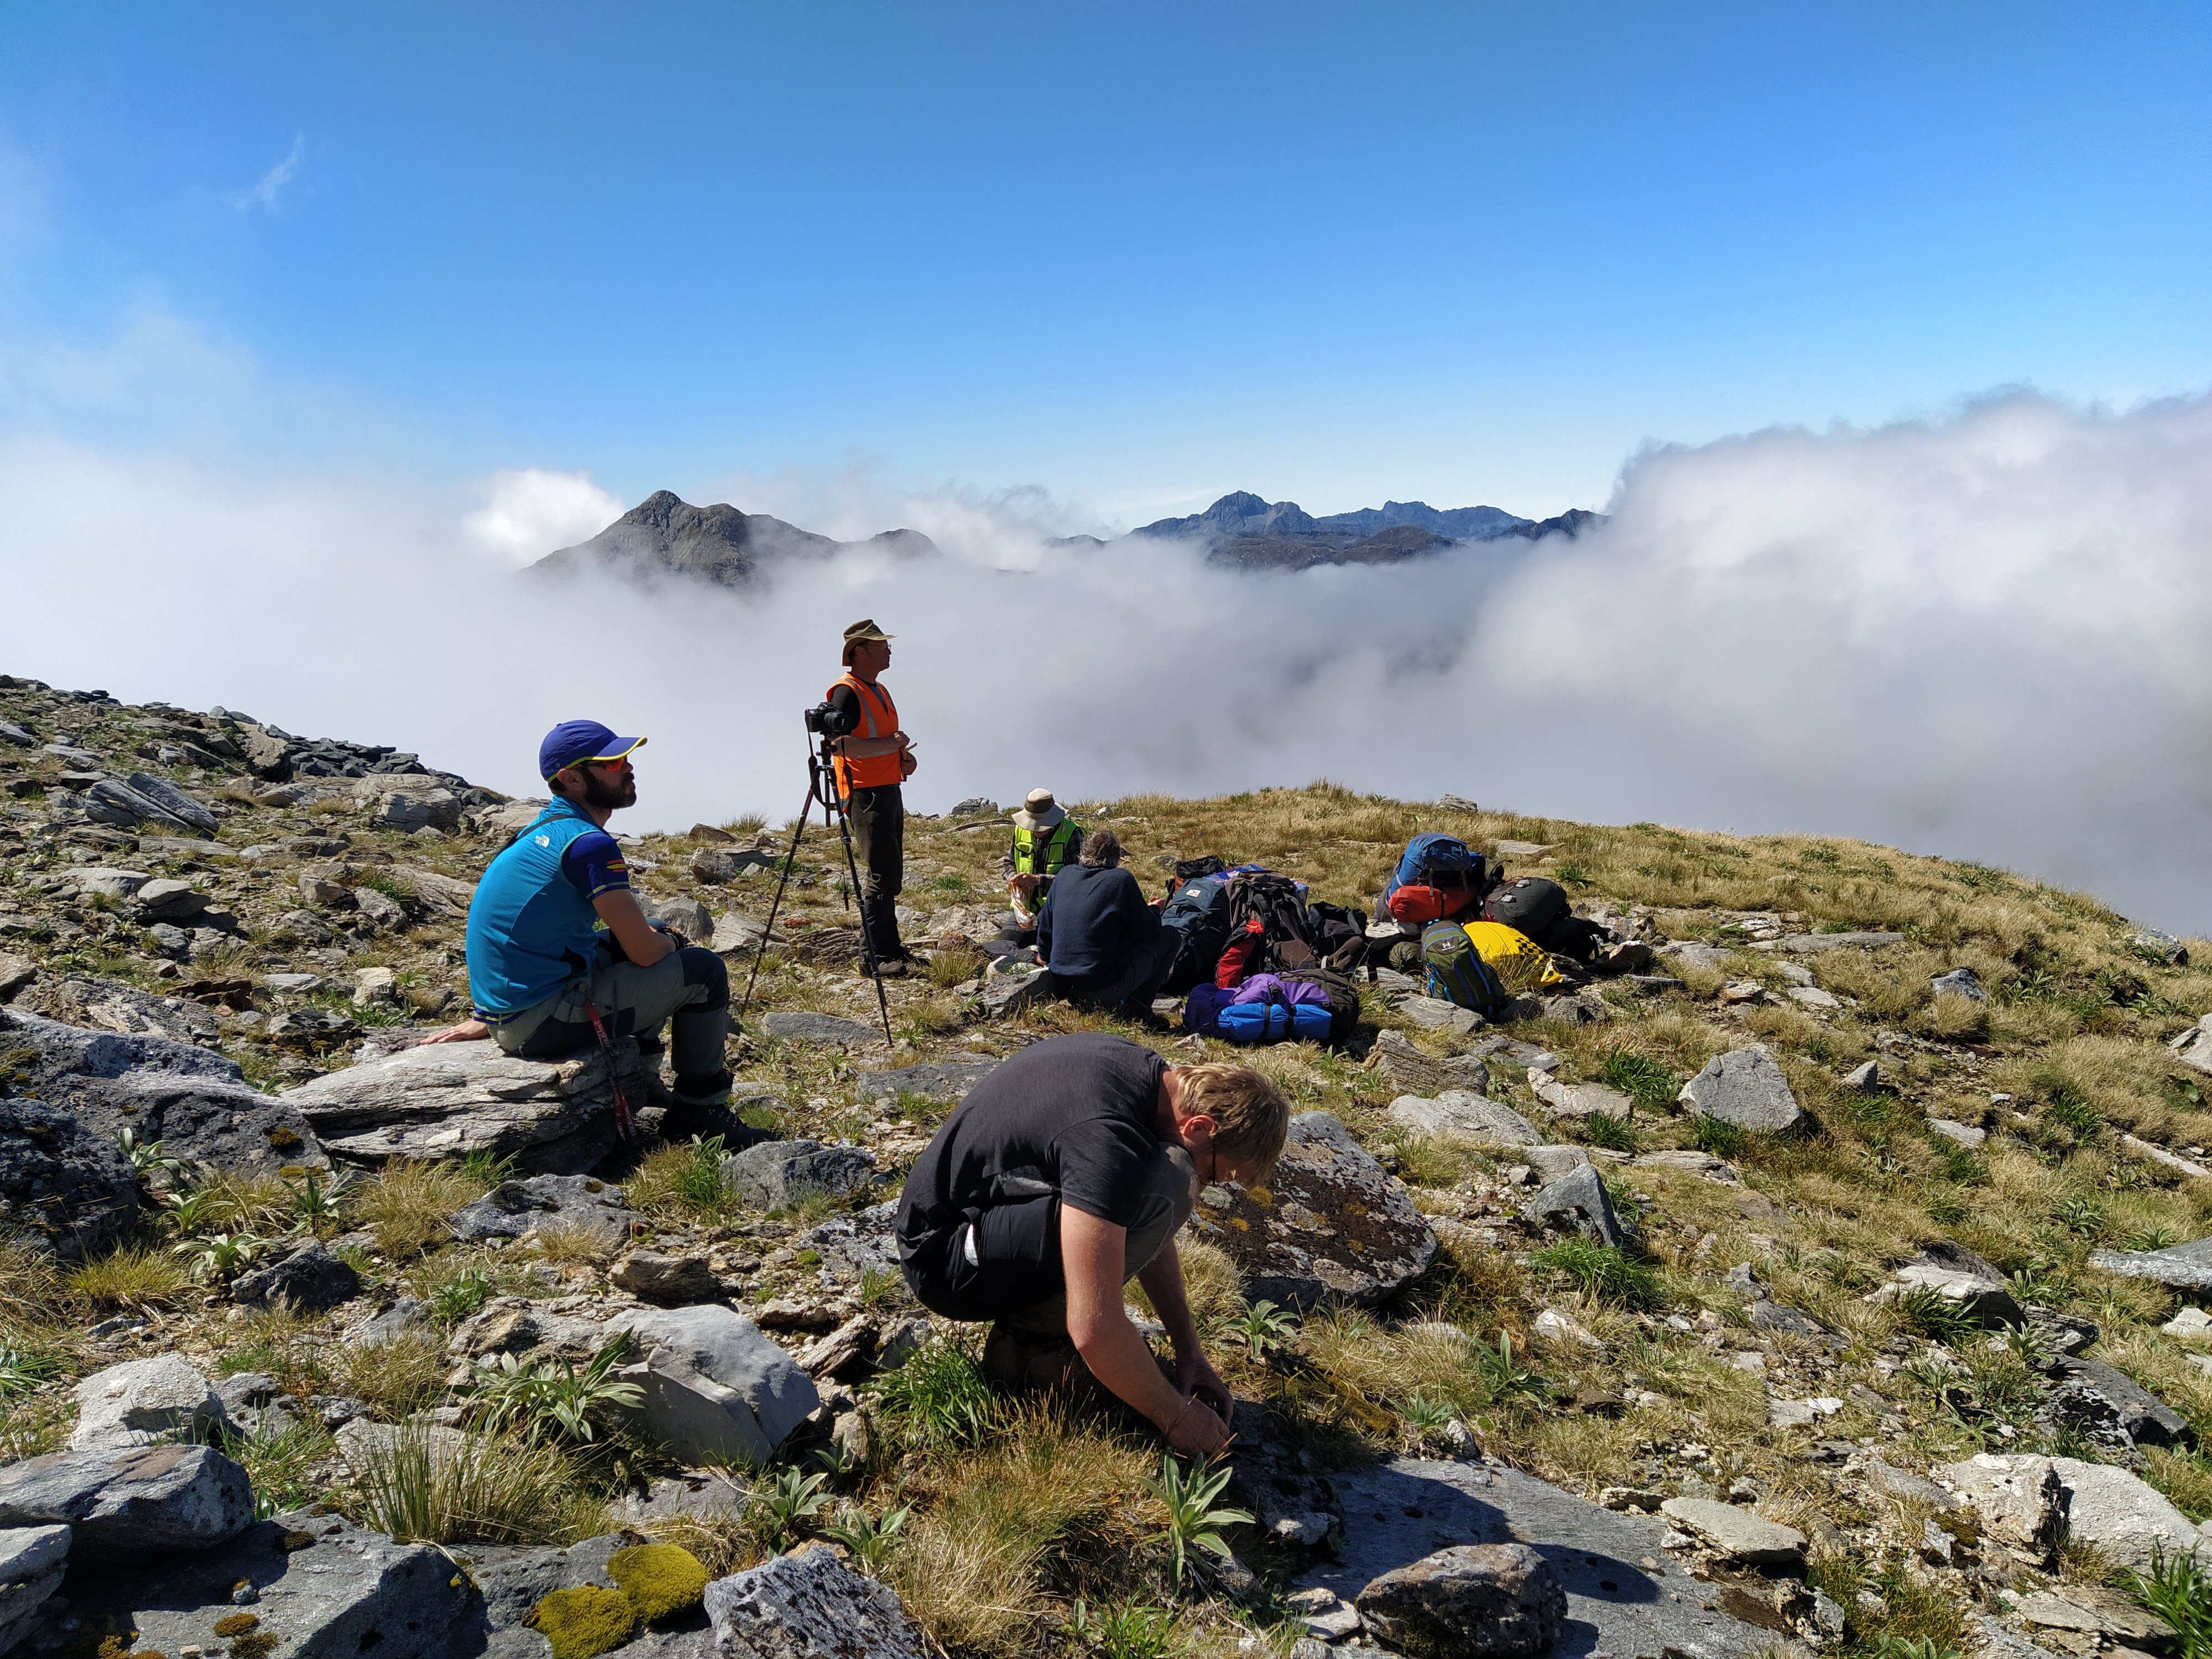 Four people on top of a mountain surrounded by camping gear and low clouds in the background